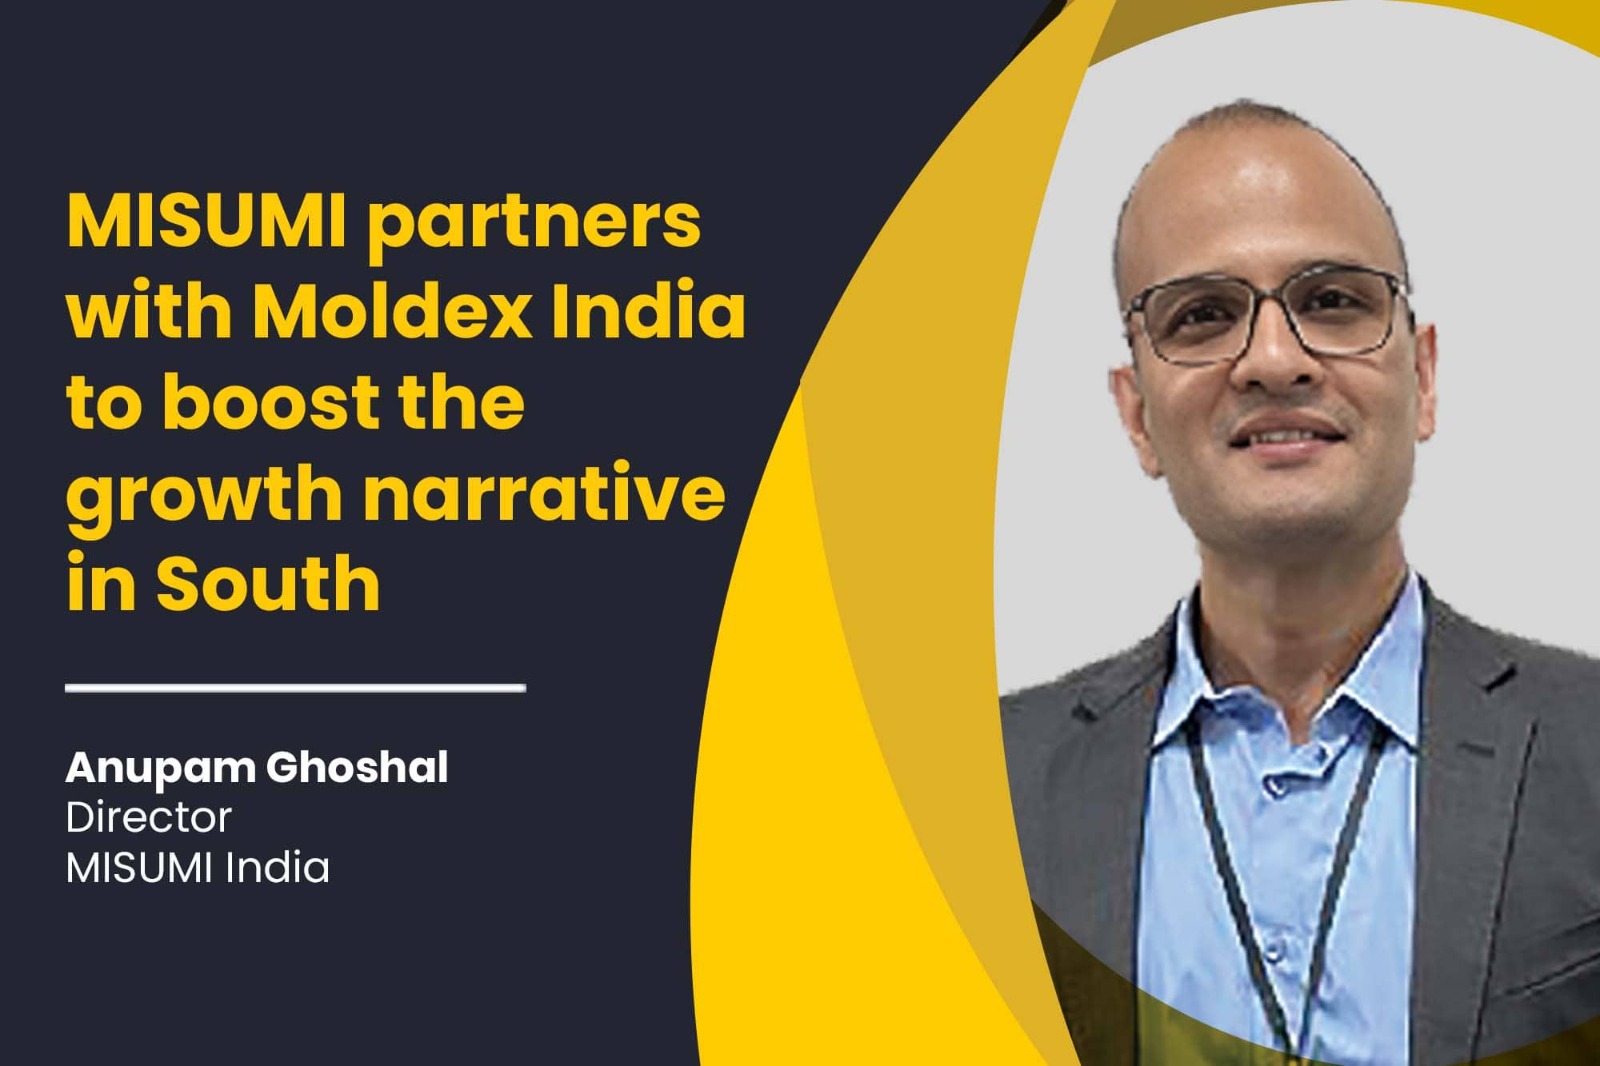 MISUMI partners with Moldex India to boost the growth narrative in South 